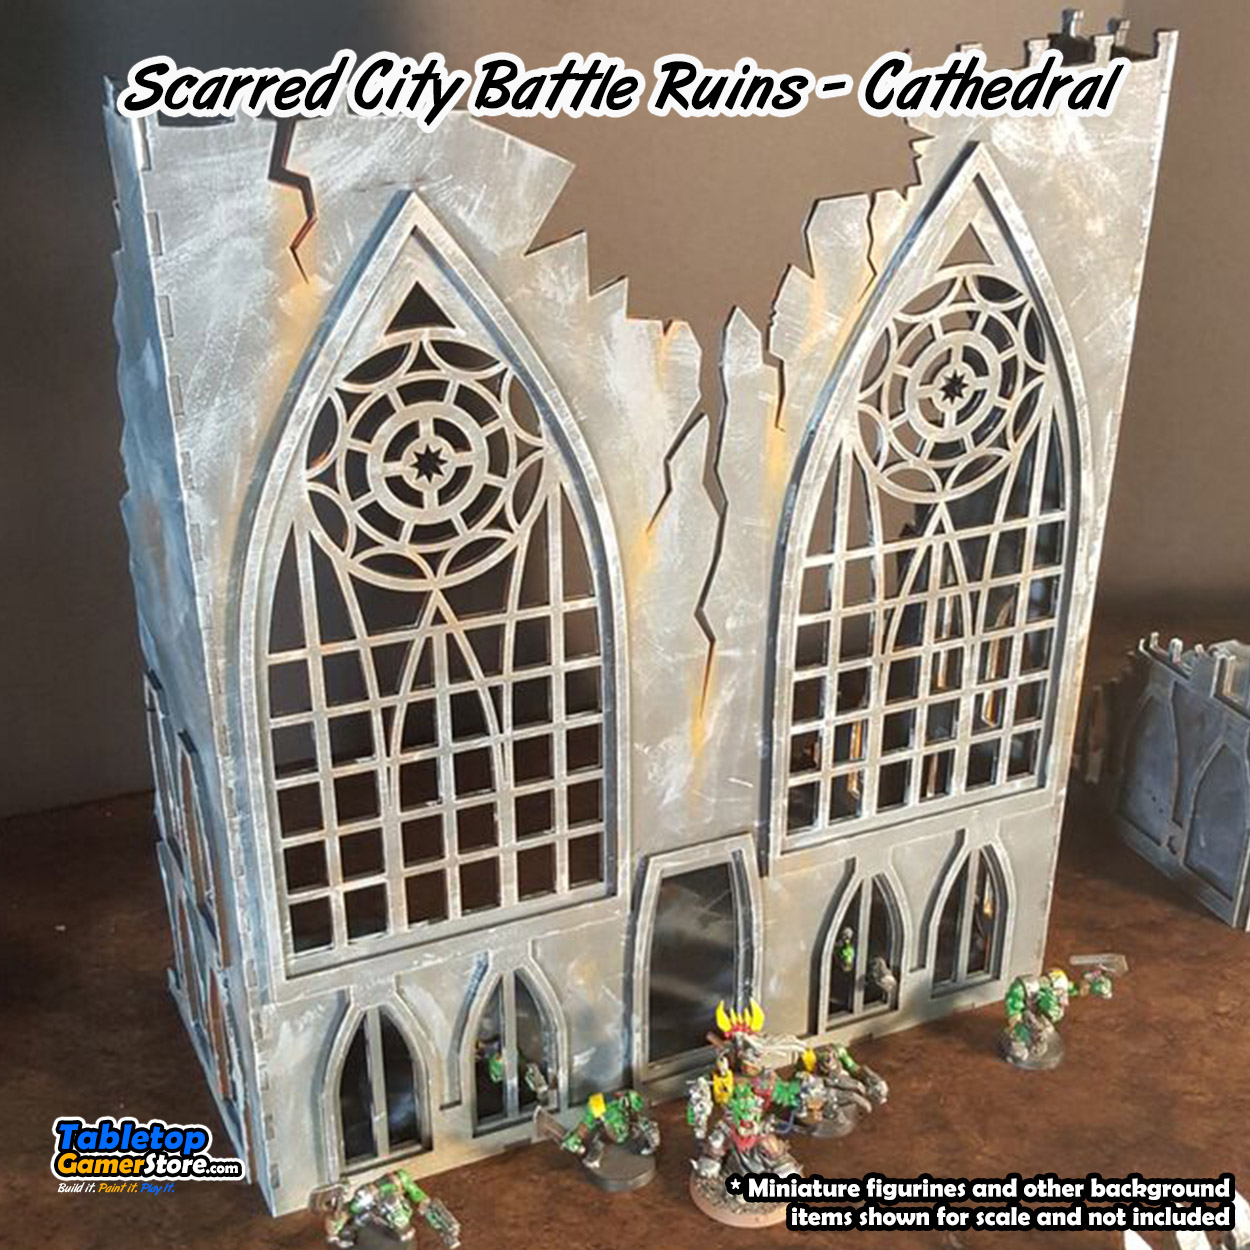 scarred_city_battle_ruins_cathedral_02